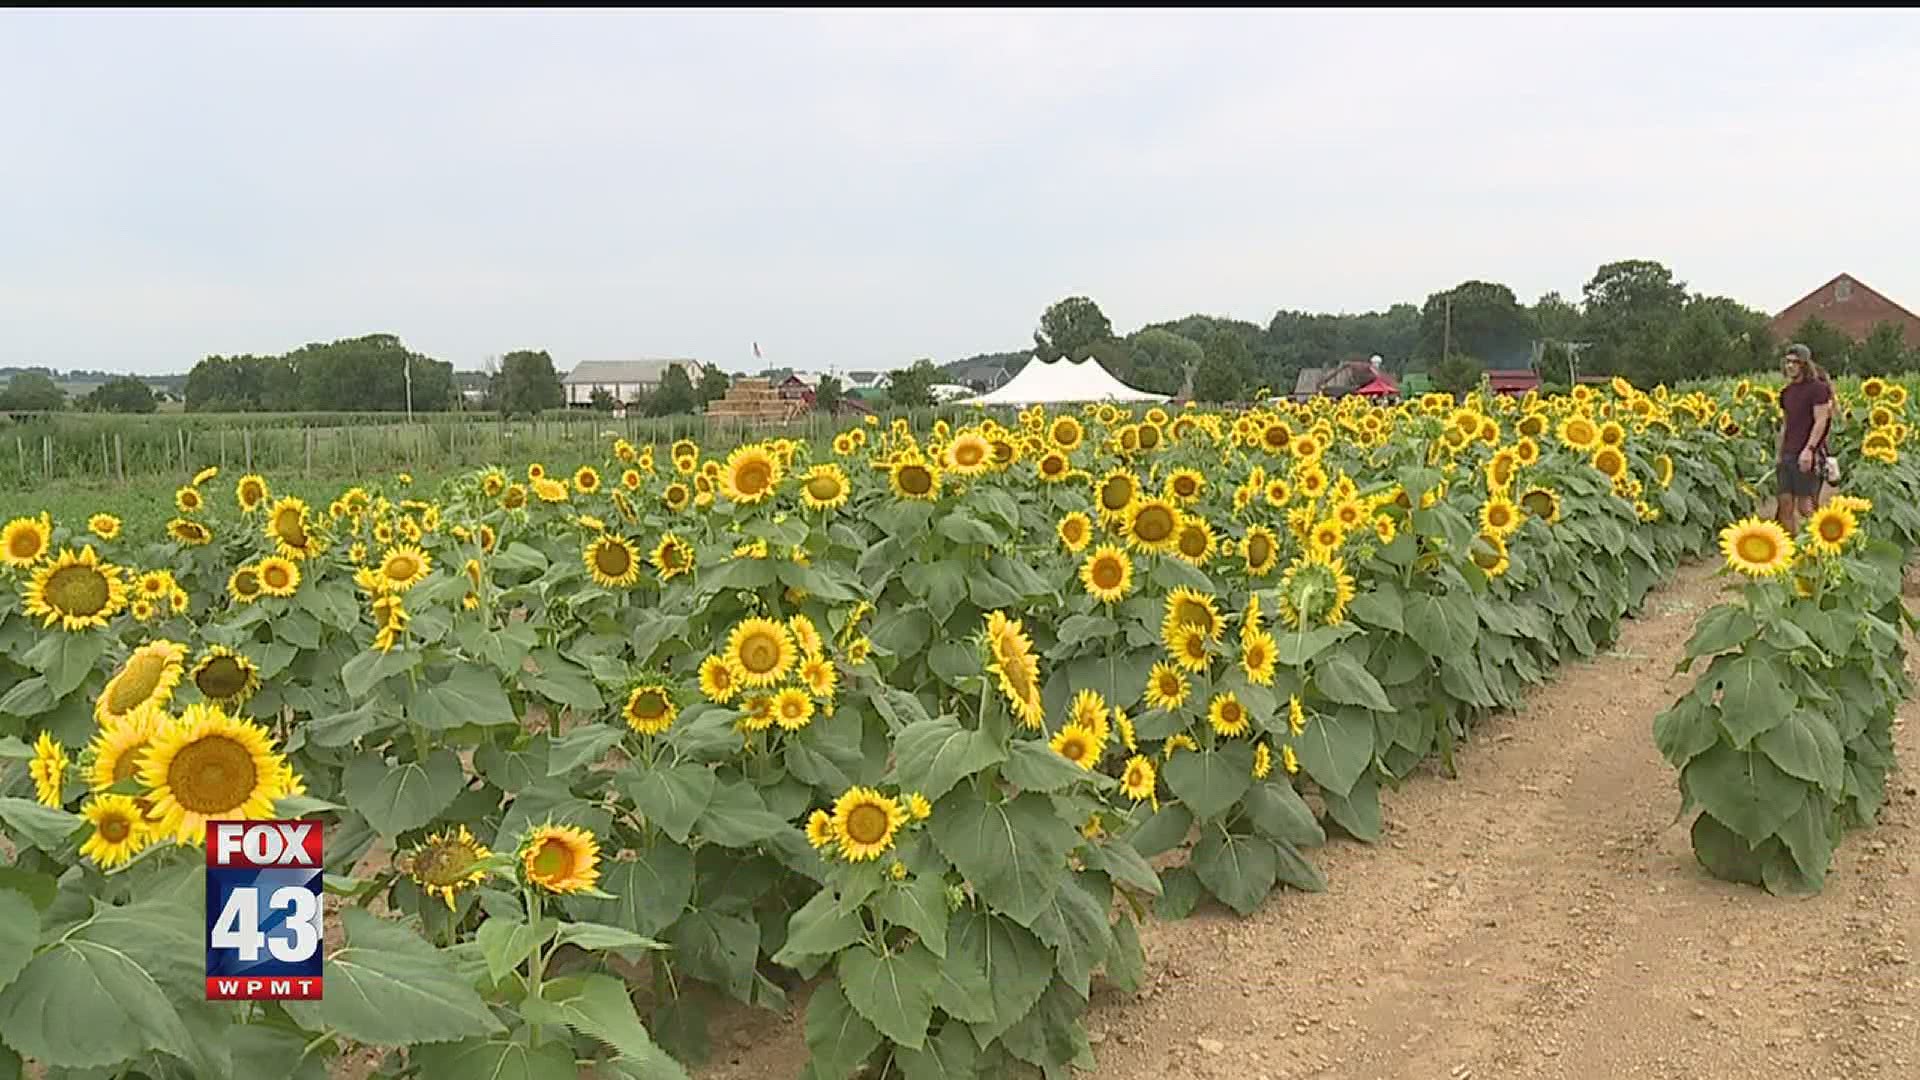 The festival kicked off with live music, activities for the kids, and plenty of sunflowers